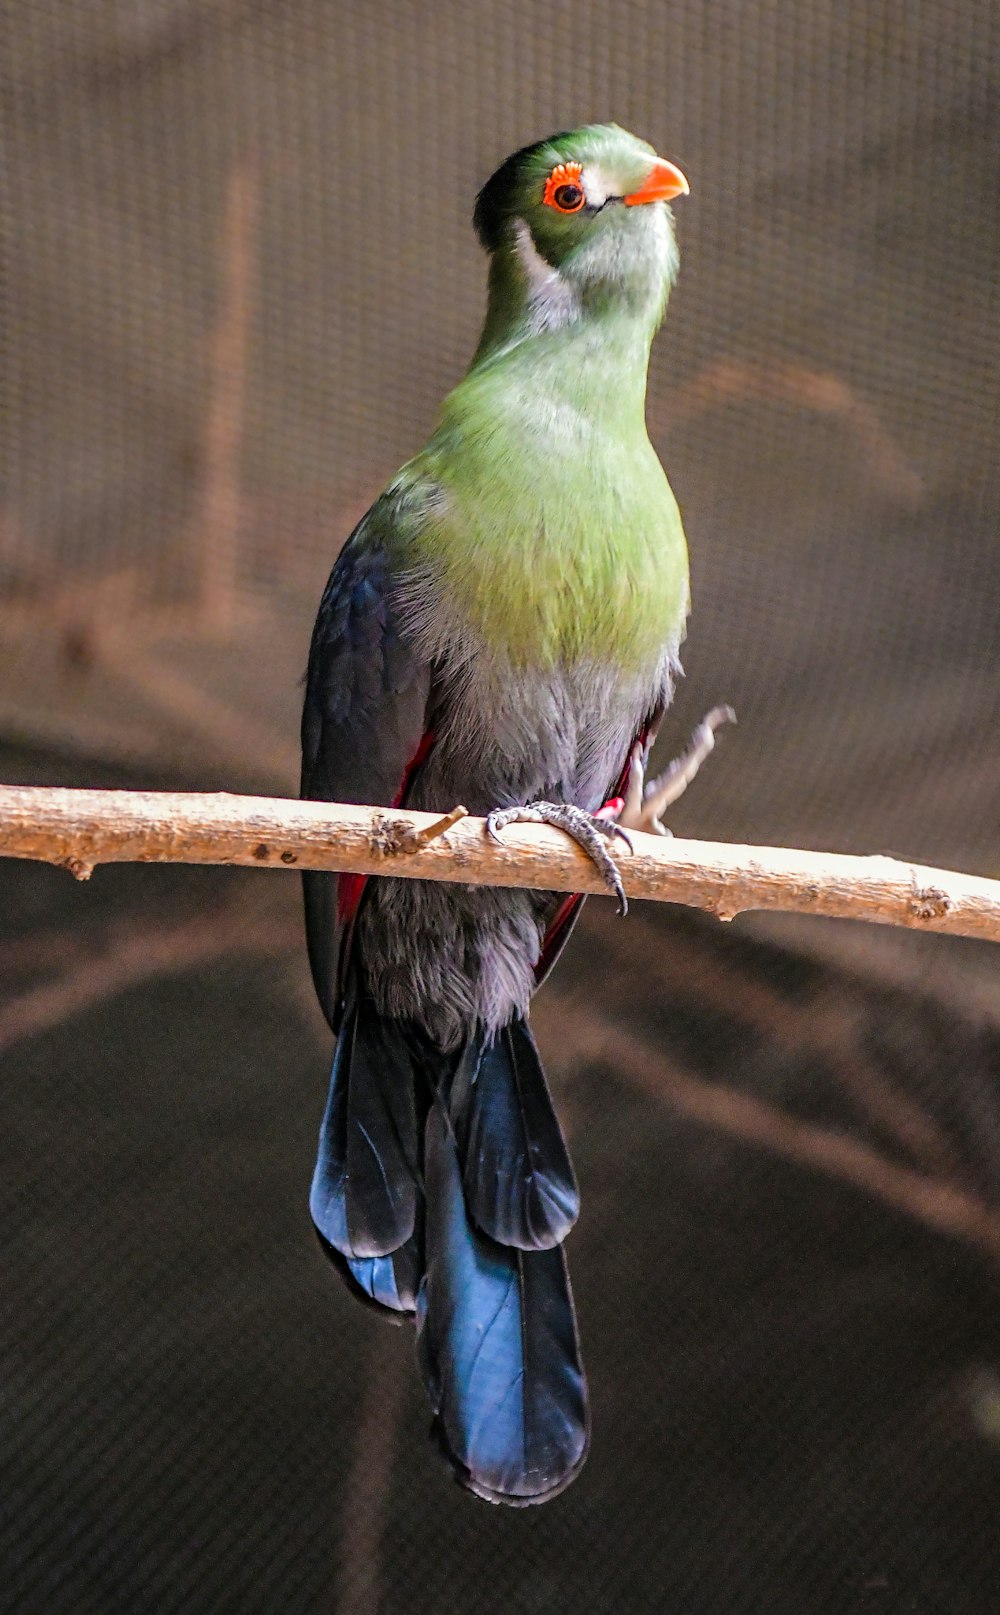 a colorful bird sitting on a branch in a cage